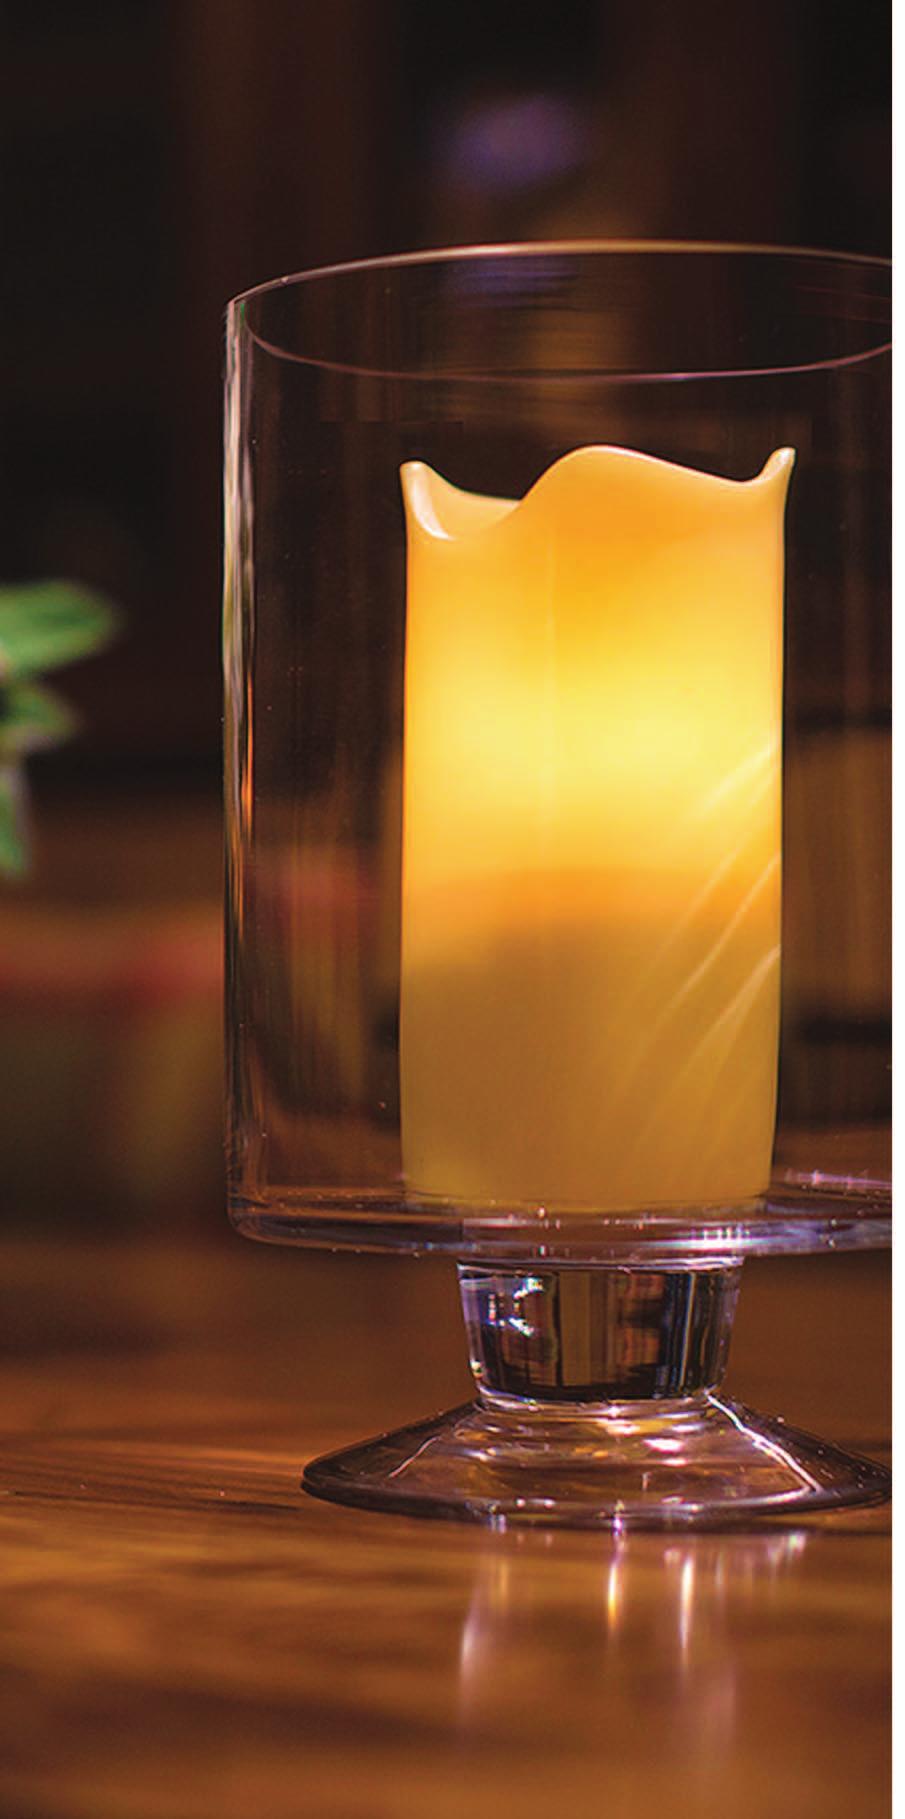 REALISTIC & DURABLE Resin Outer Shaped Like a Traditional Pillar Candle 8.